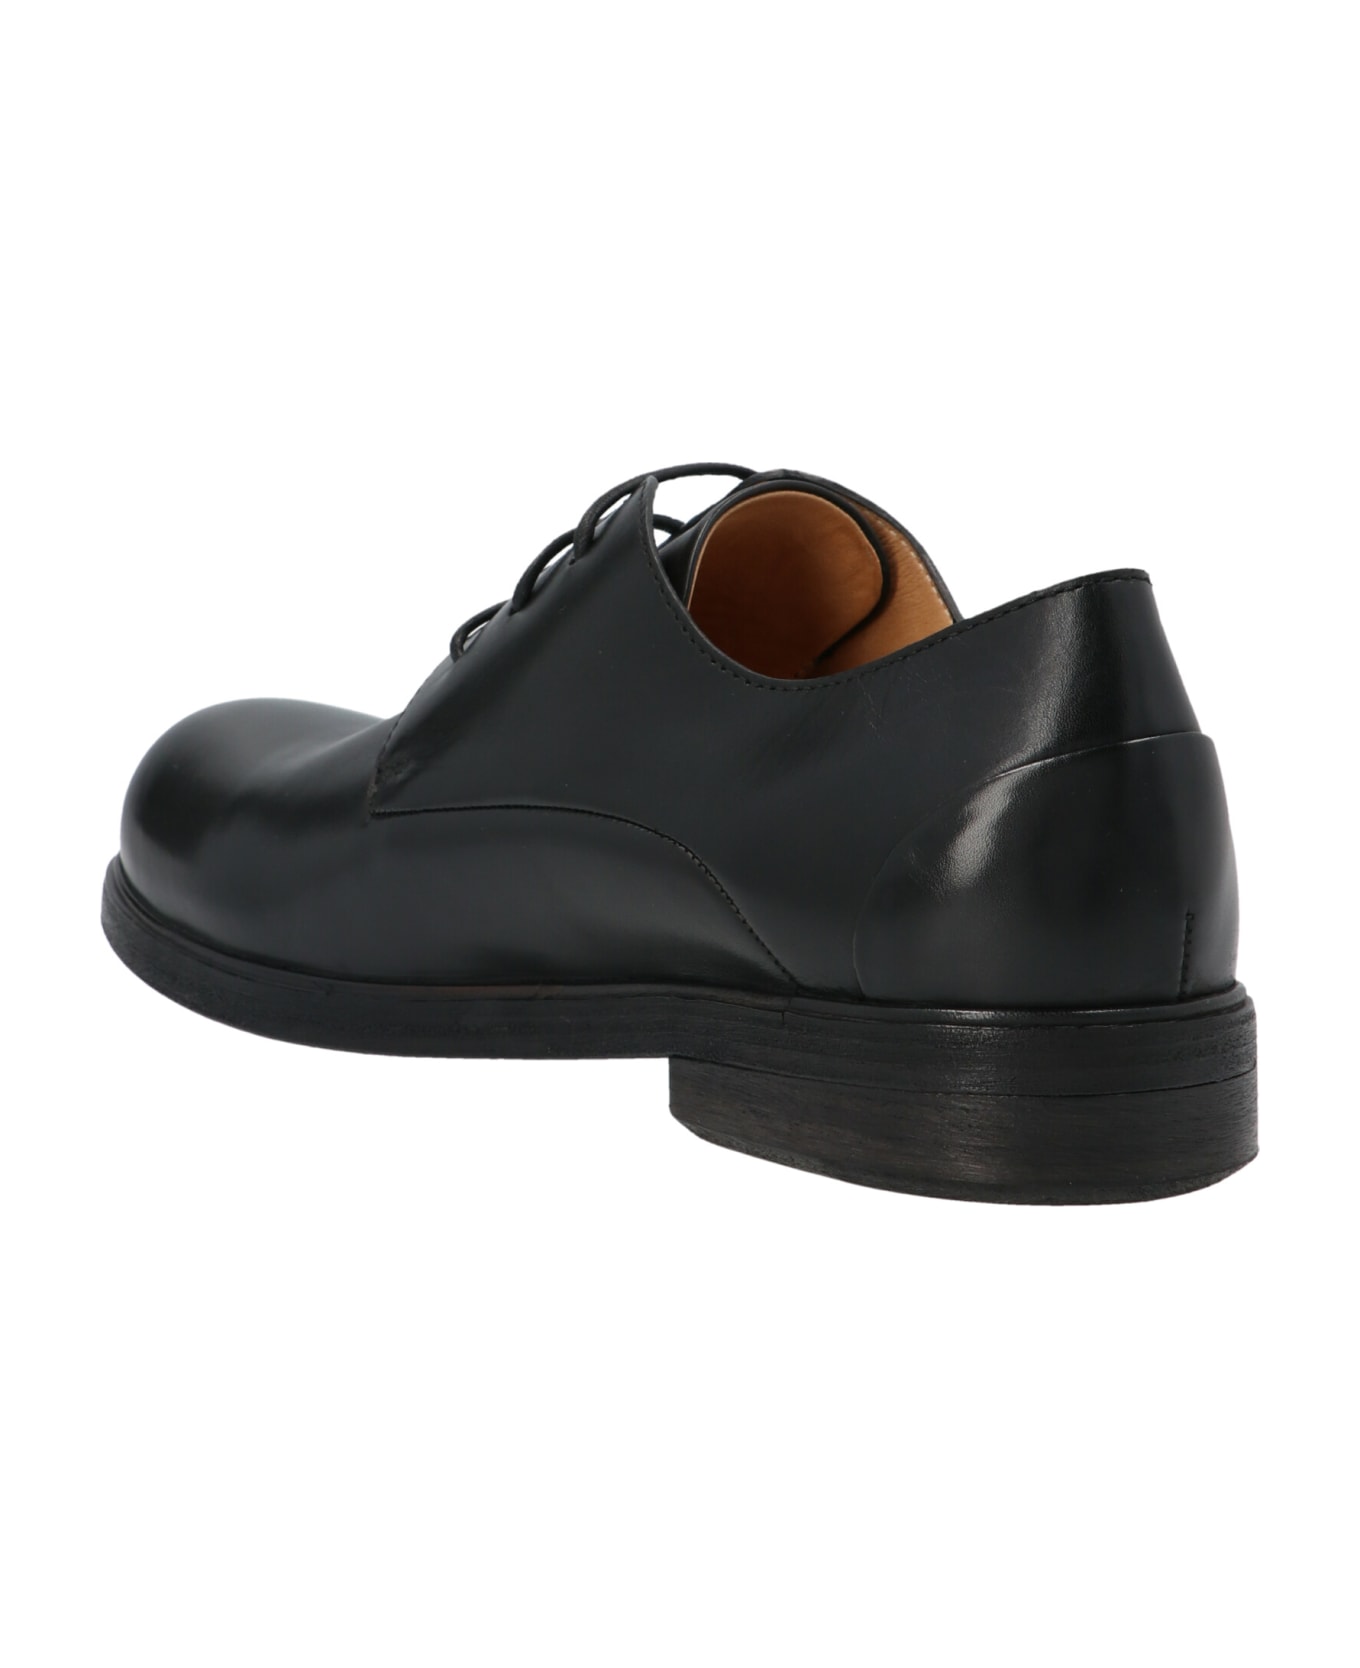 Marsell Zucca Media' Derby Shoes You - Black  